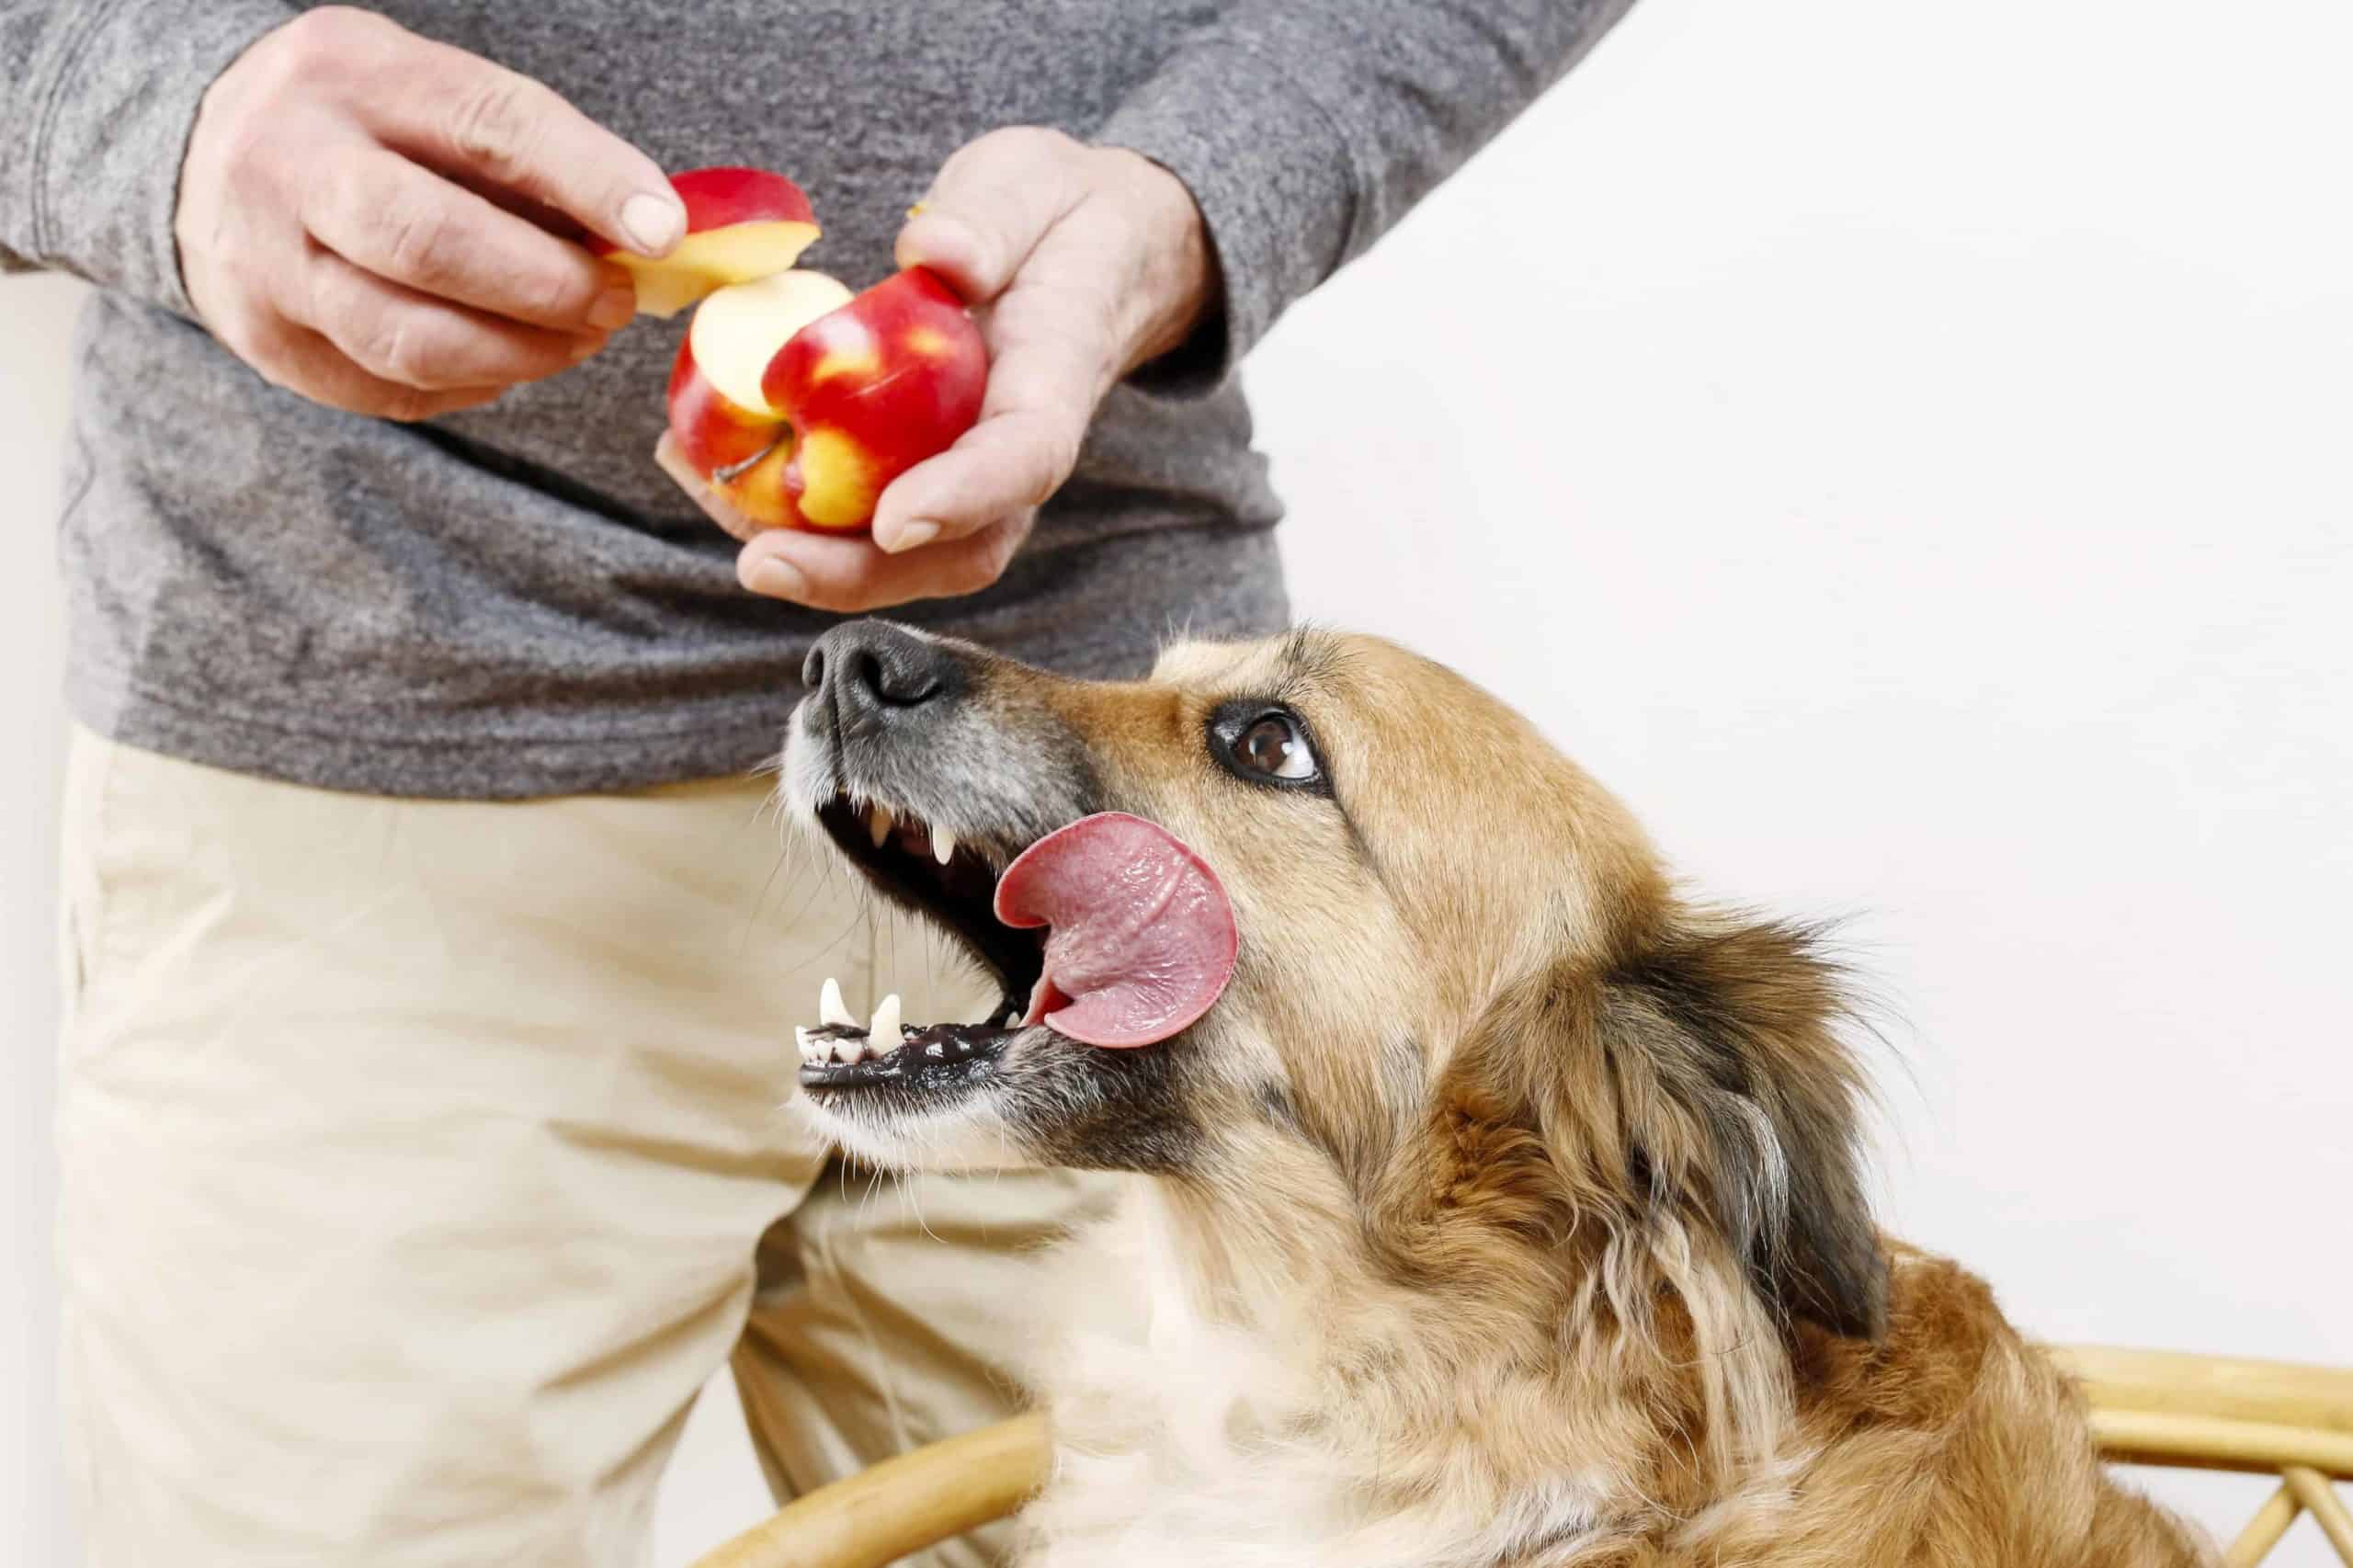 Owner feeds dog apple. Create healthy snacks for your puppy using human foods including carrots, pumpkin, bananas, and apples.